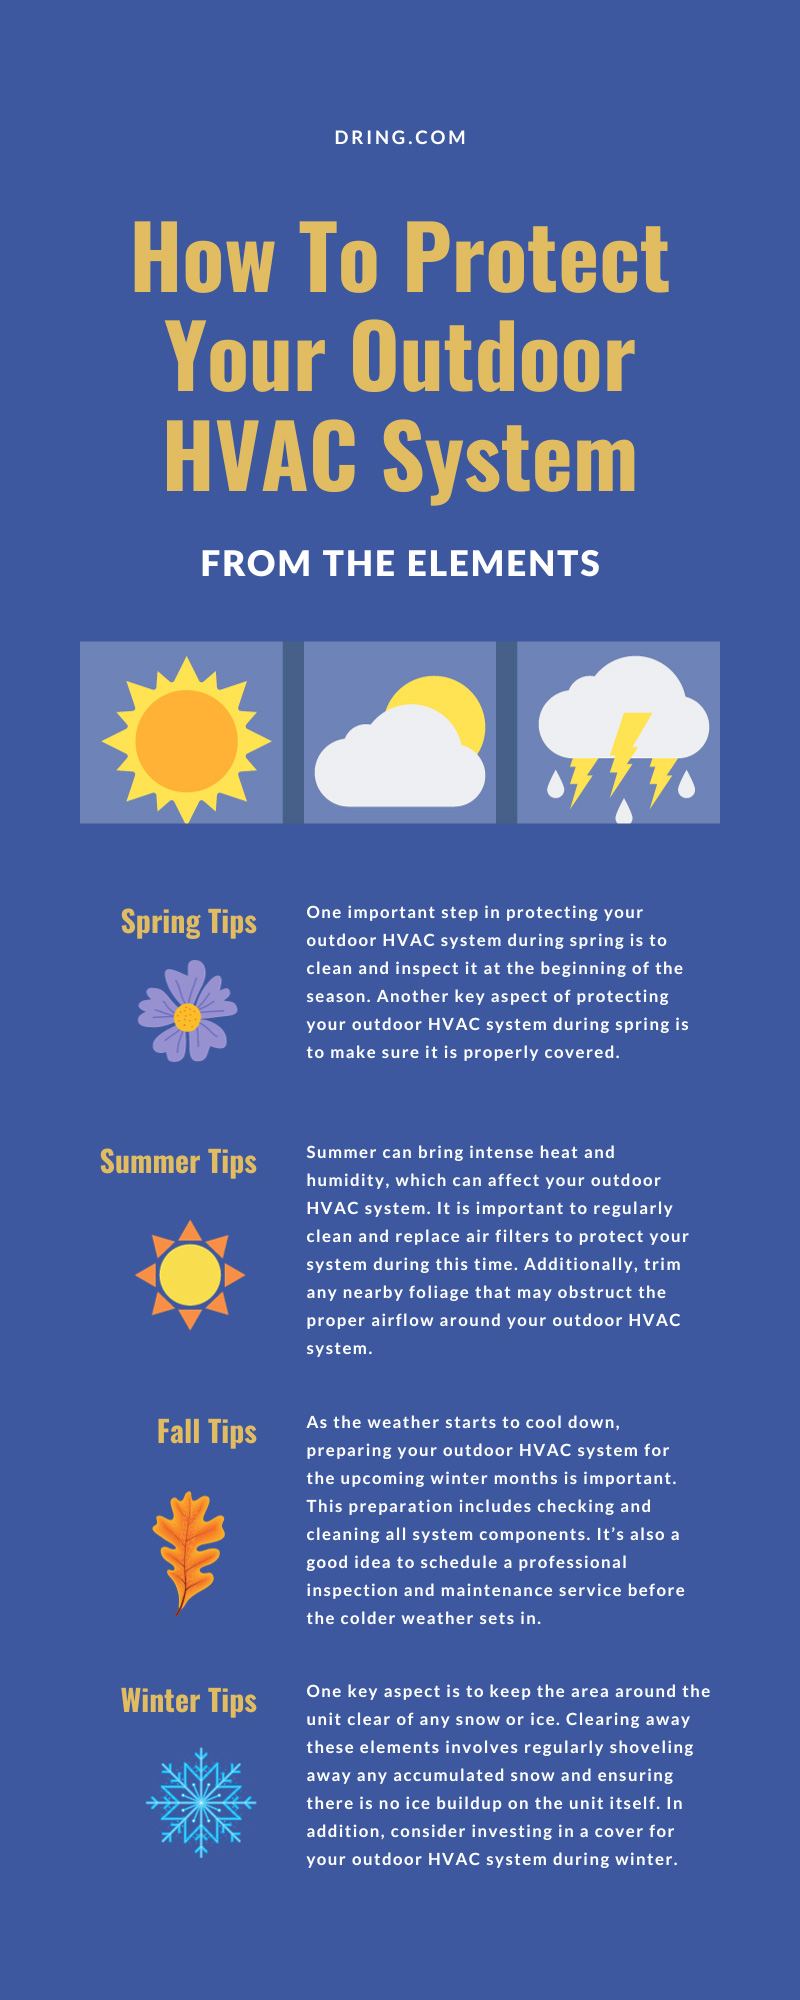 How To Protect Your Outdoor HVAC System From the Elements